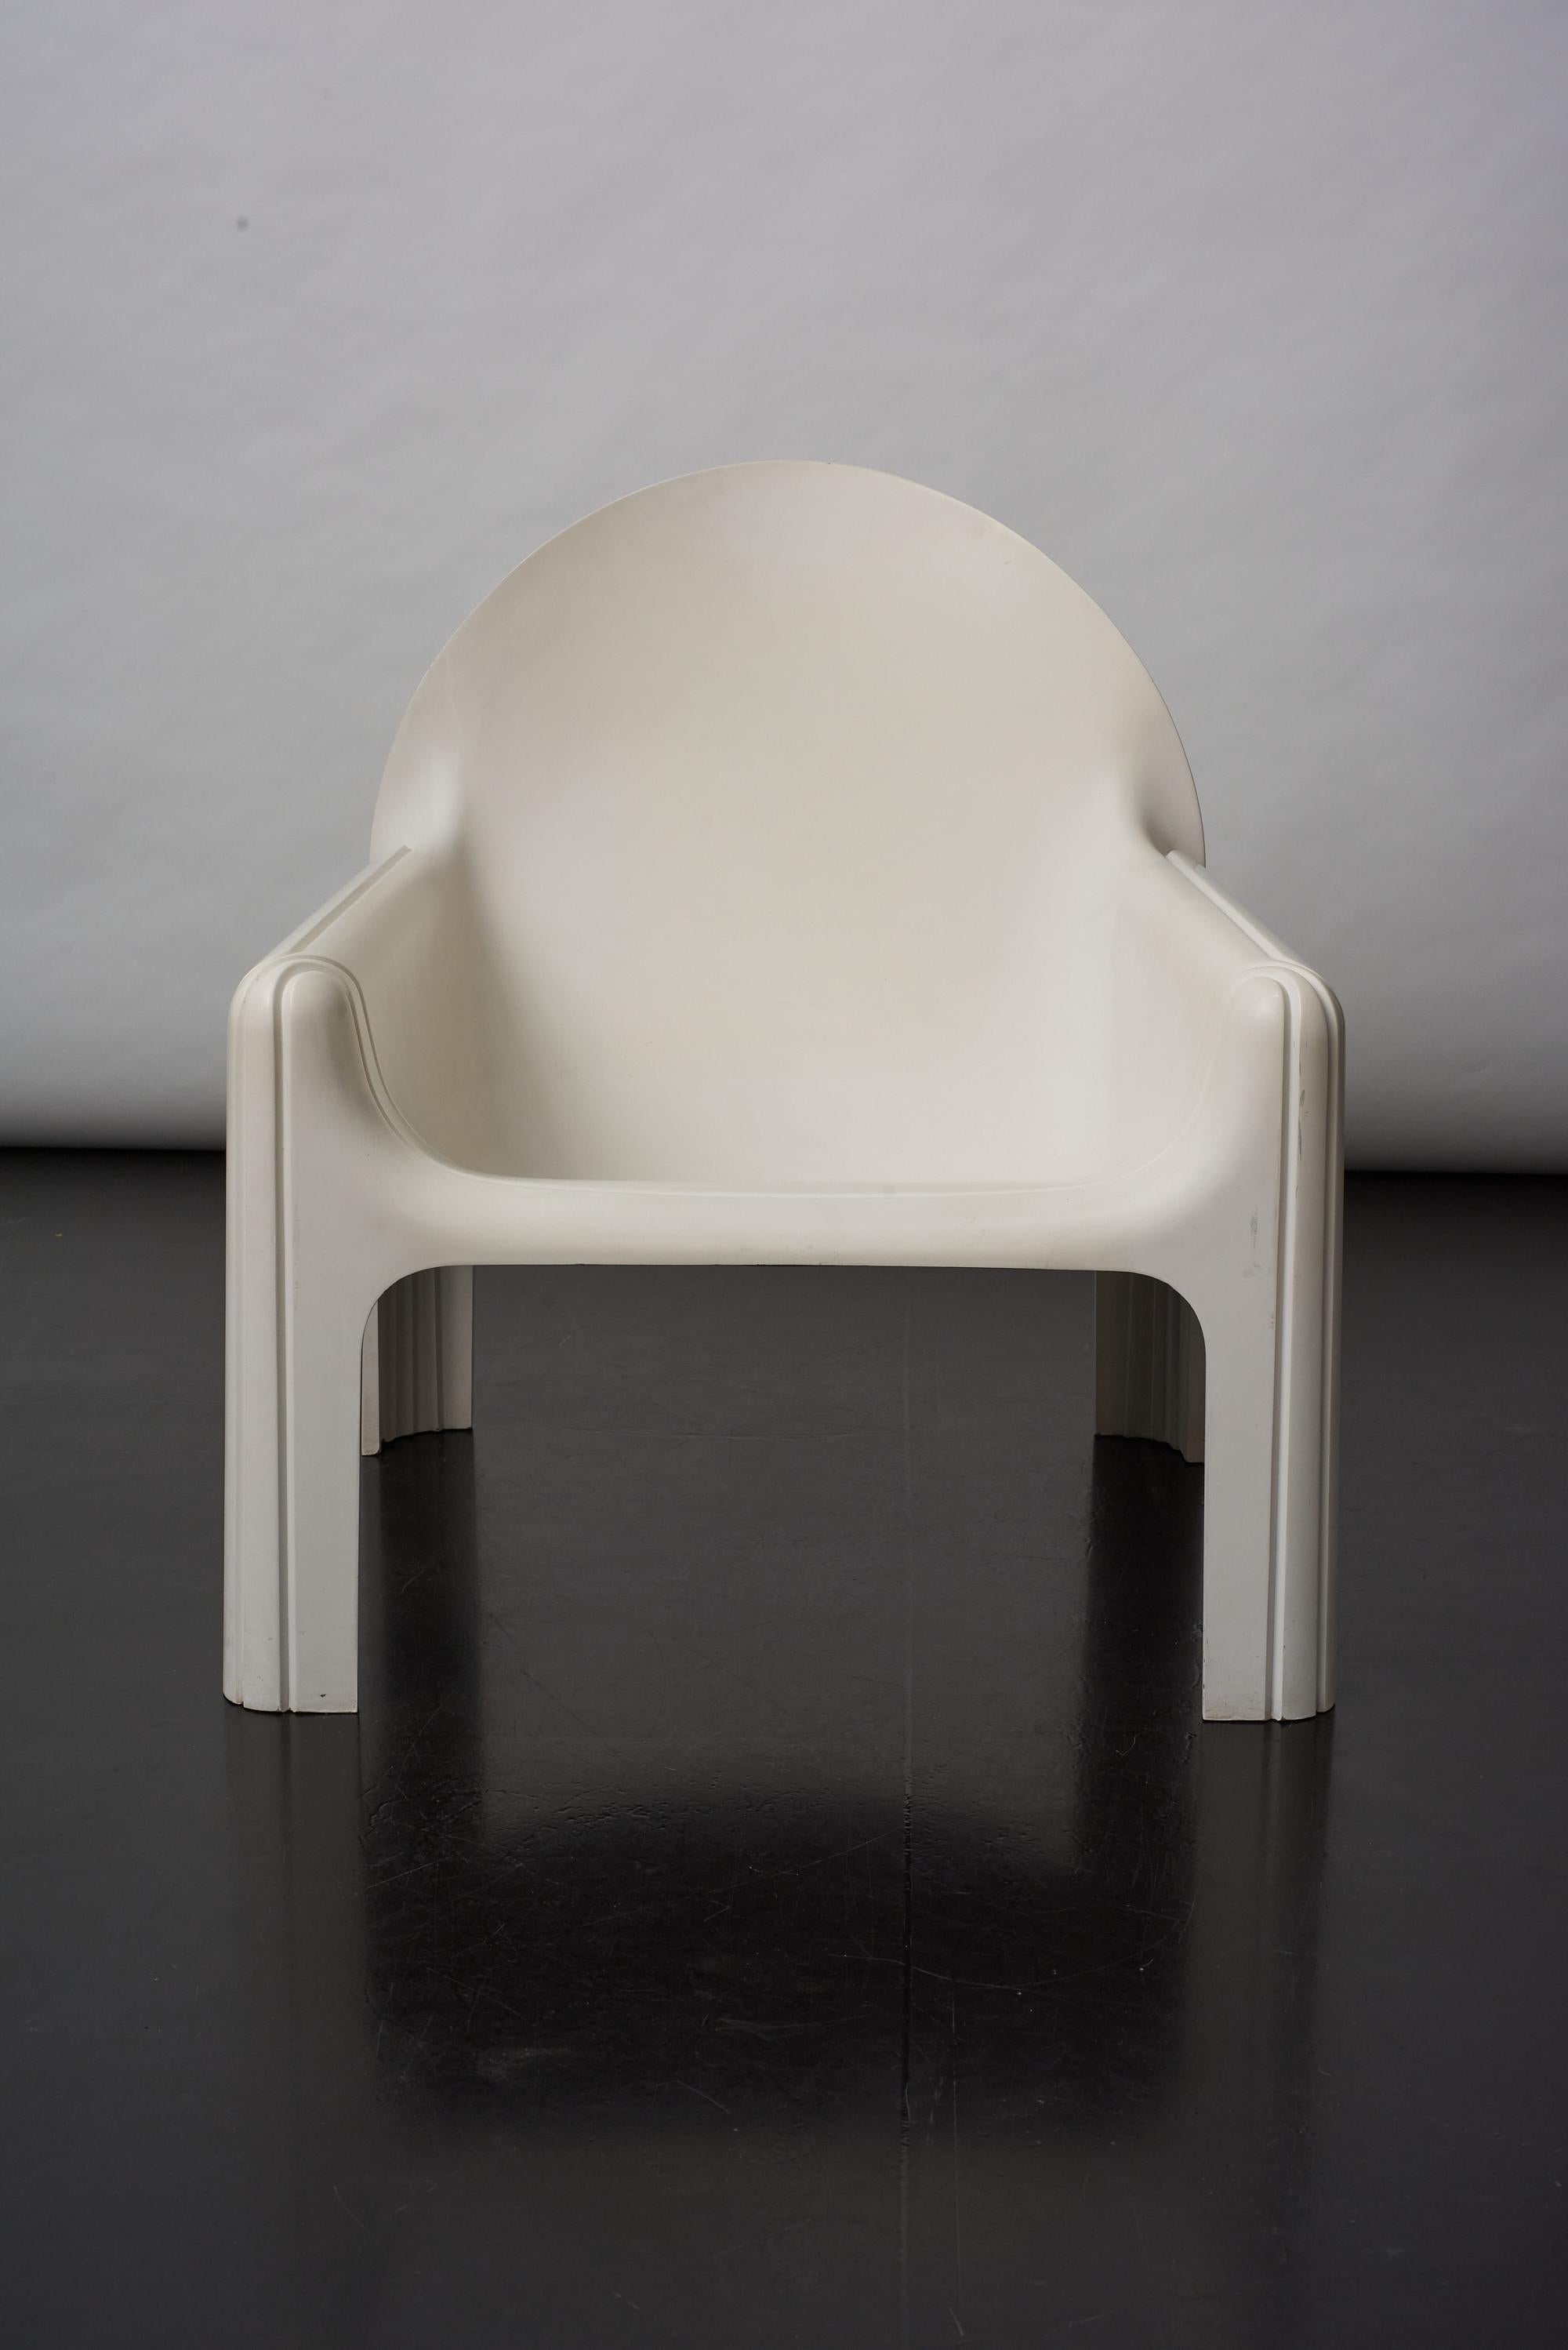 Space Age Kartell Lounge Chair 4794 Designed by Gae Aulenti, 1974